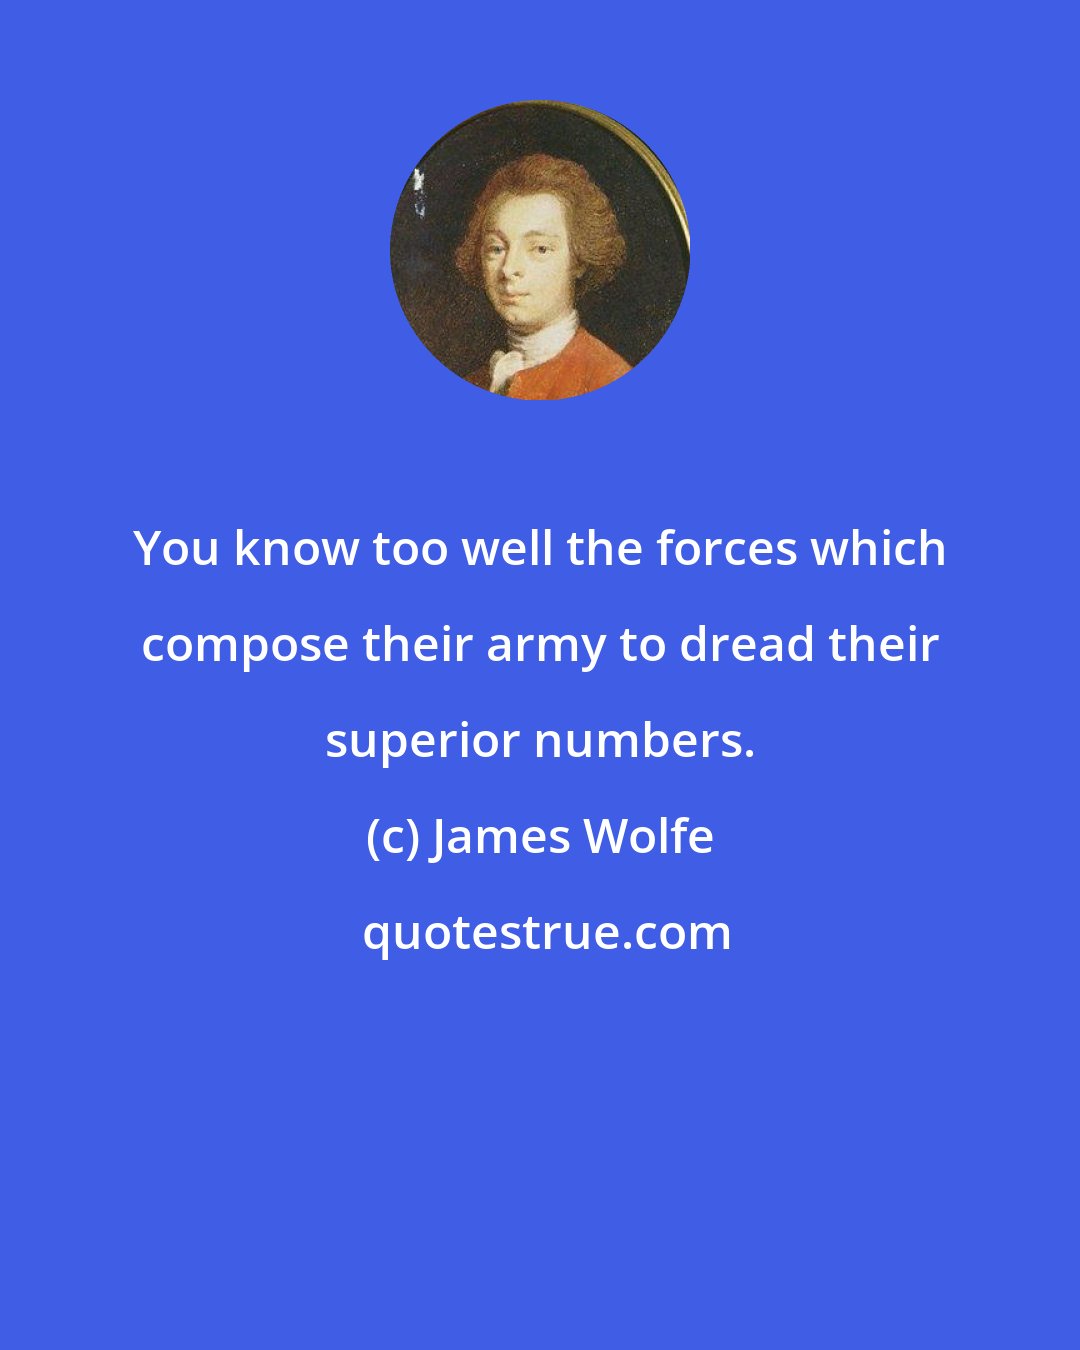 James Wolfe: You know too well the forces which compose their army to dread their superior numbers.